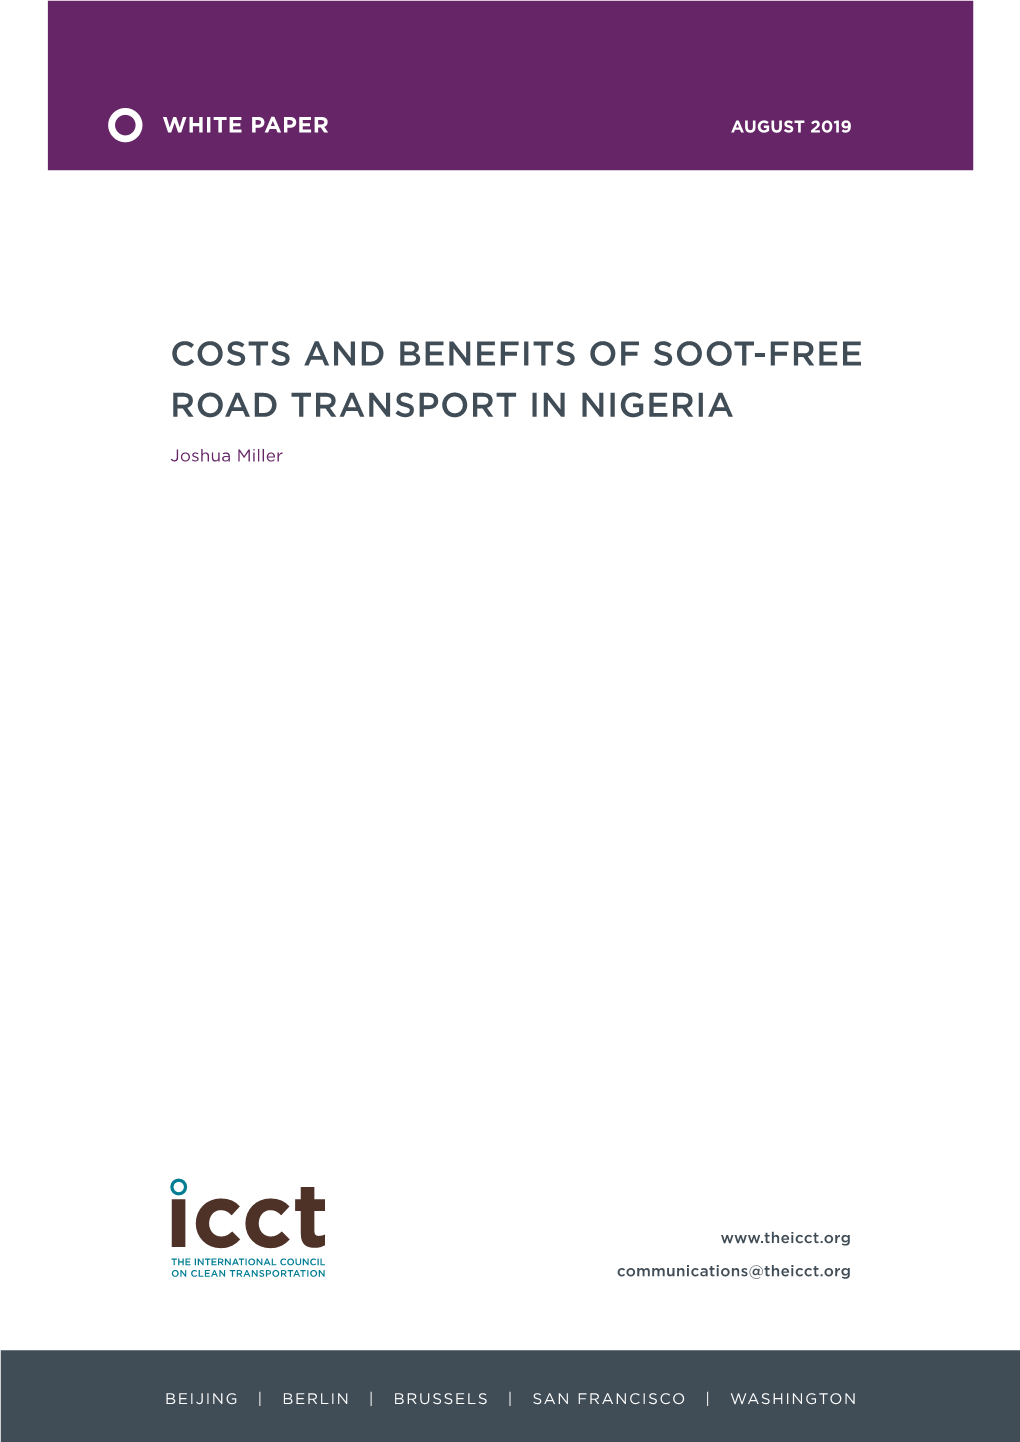 Cost and Benefits of Soot-Free Road Transport in Nigeria